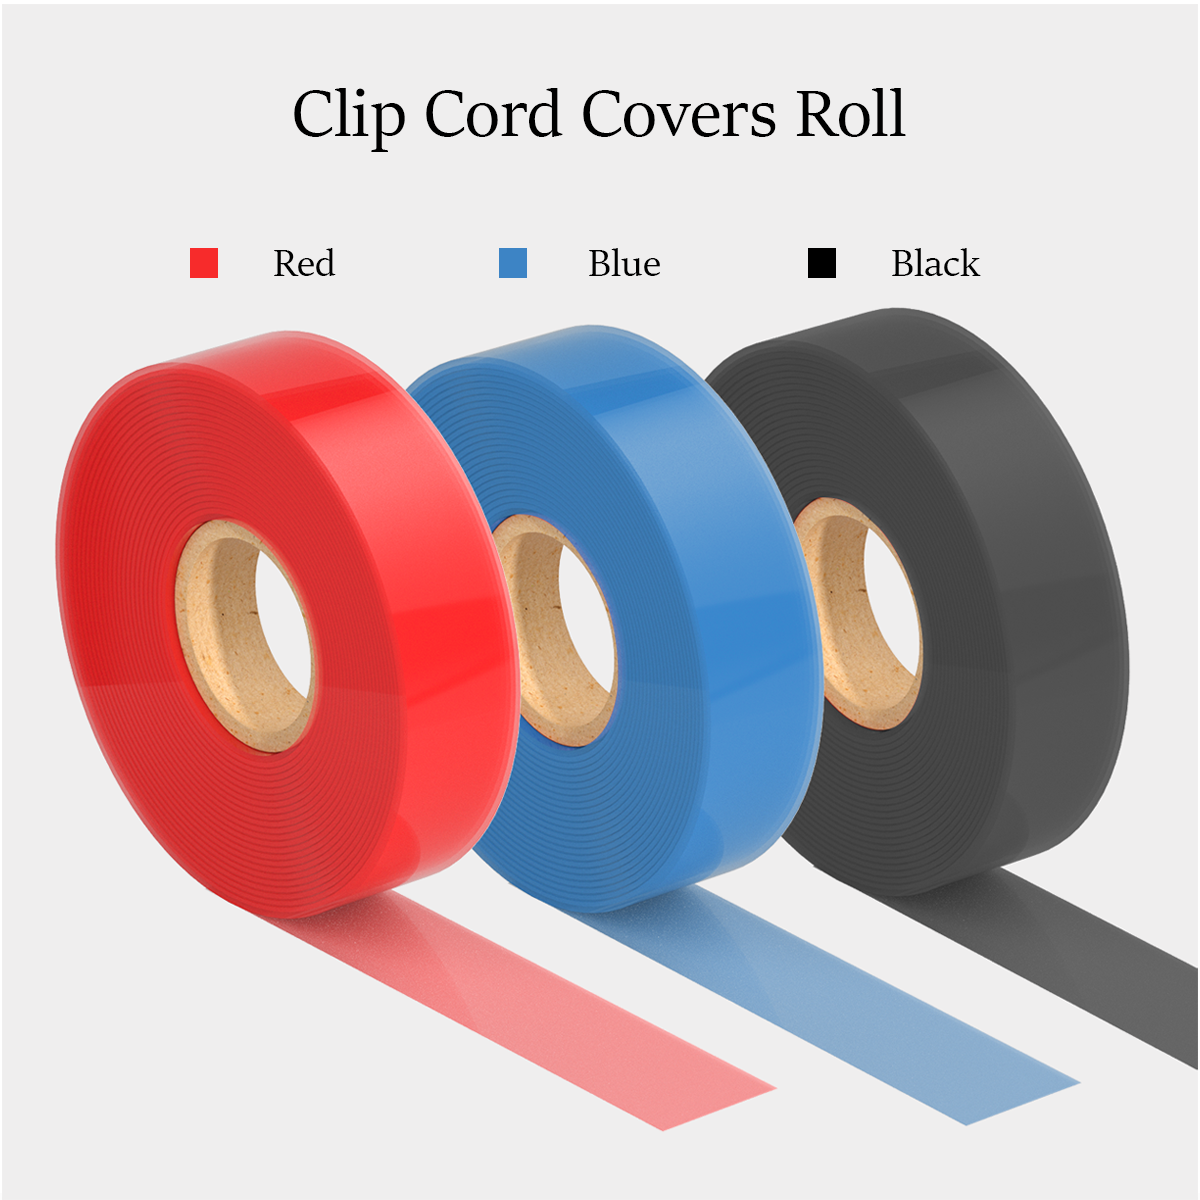 Clip Cord Covers with Grip Tape Wraps - NAQASE 125pcs Clip Cord Bags Pen  Bags Cord Sleeves Blue Clip Cord Covers Wrap and 6pcs Tattoo Bandages  Elastic Grip Tape Wraps Black+6pcs 